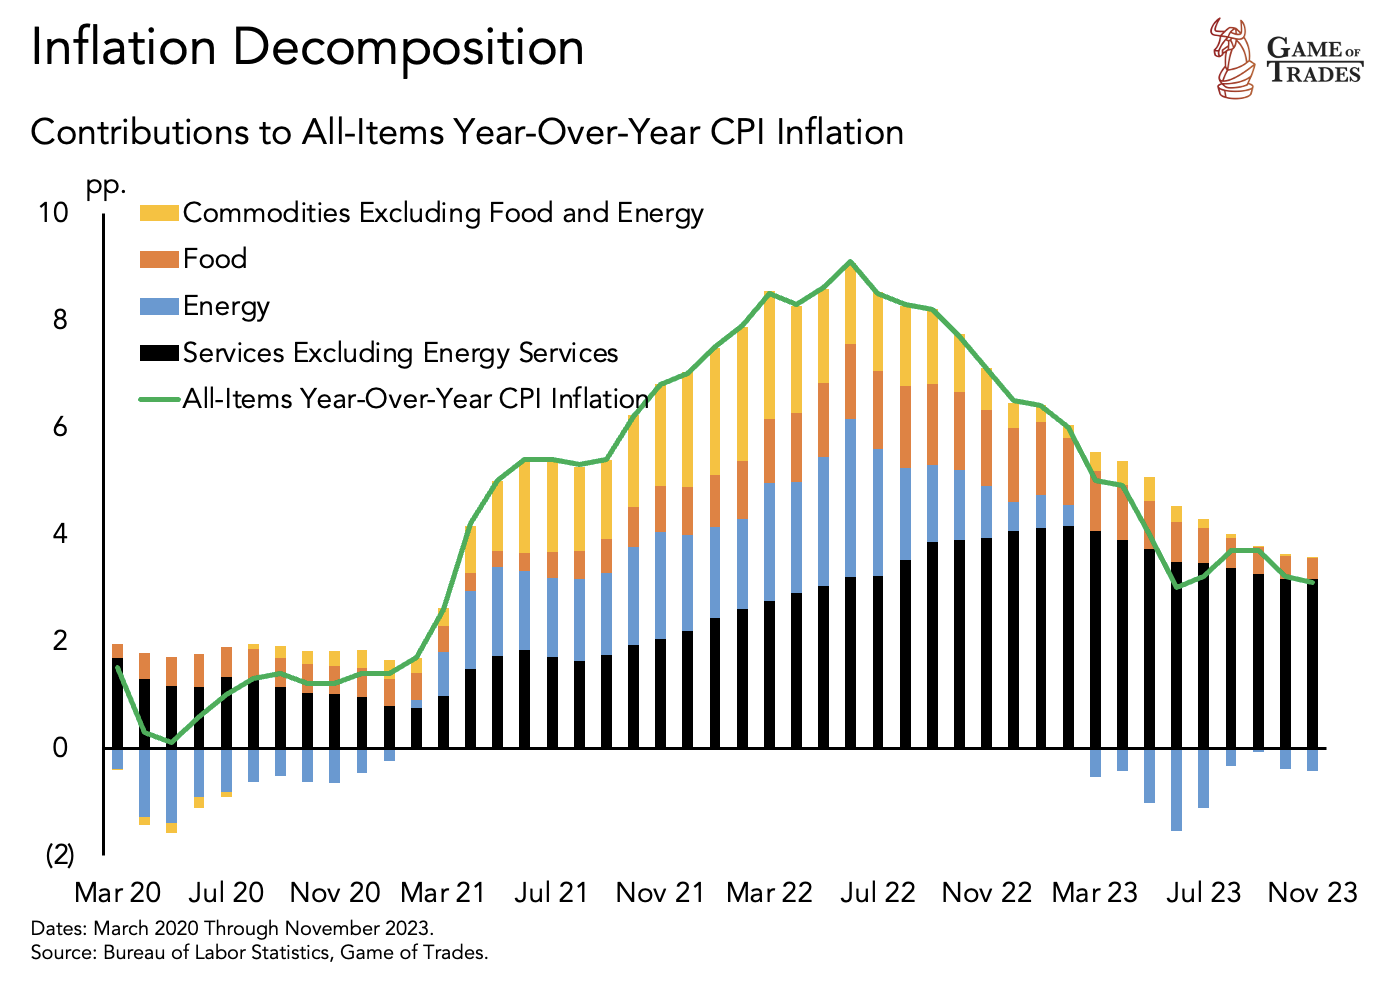 Inflation decomposition